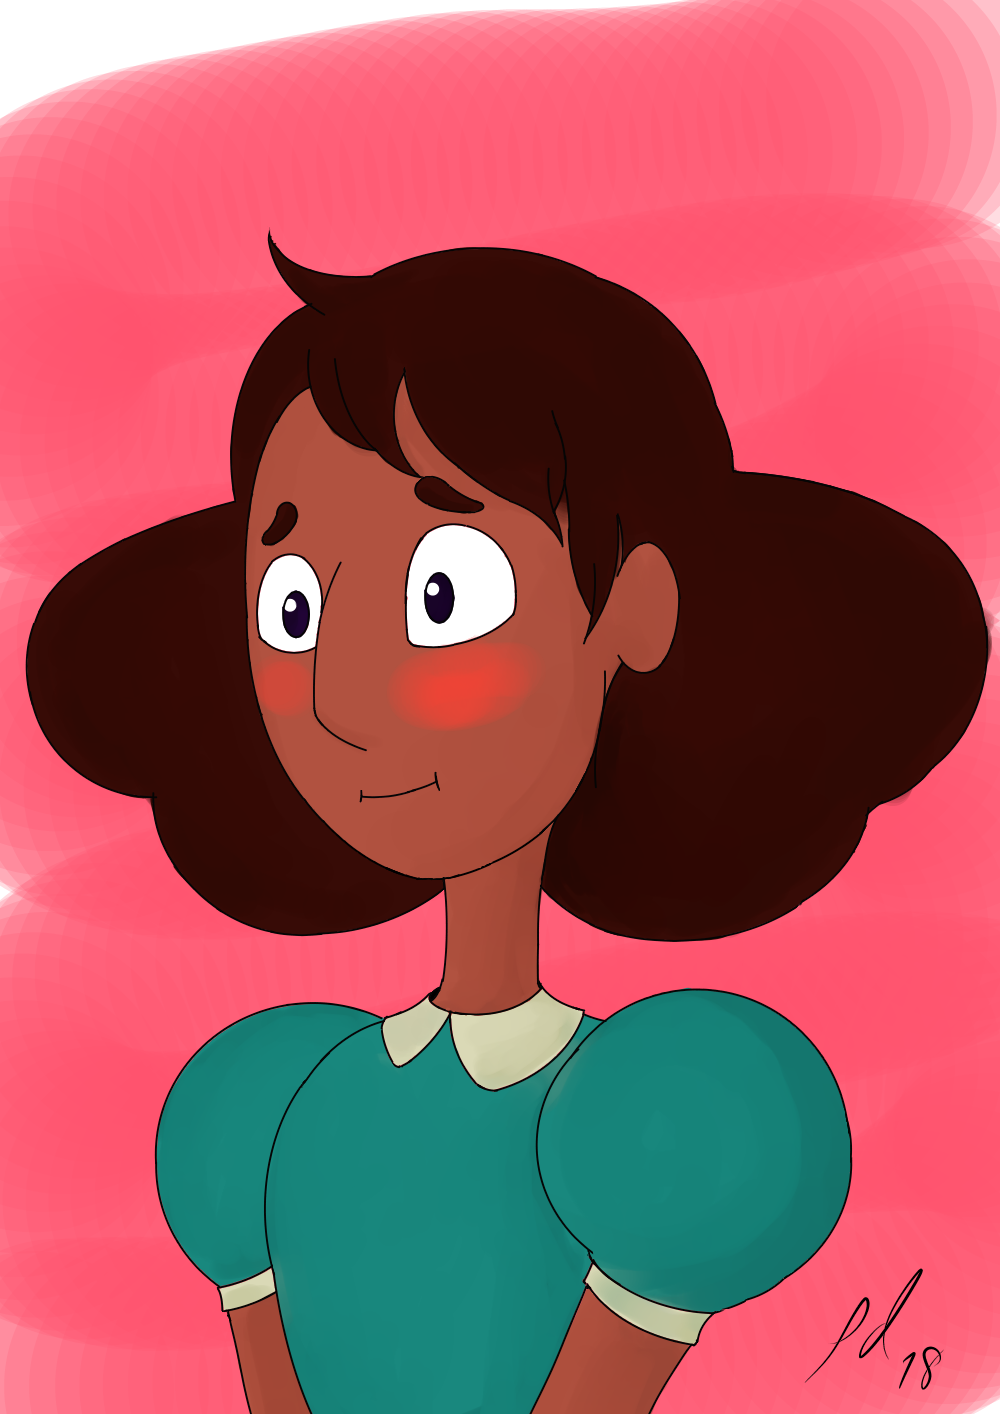 Connie (repost) ❤ it’s my first time color digitally.